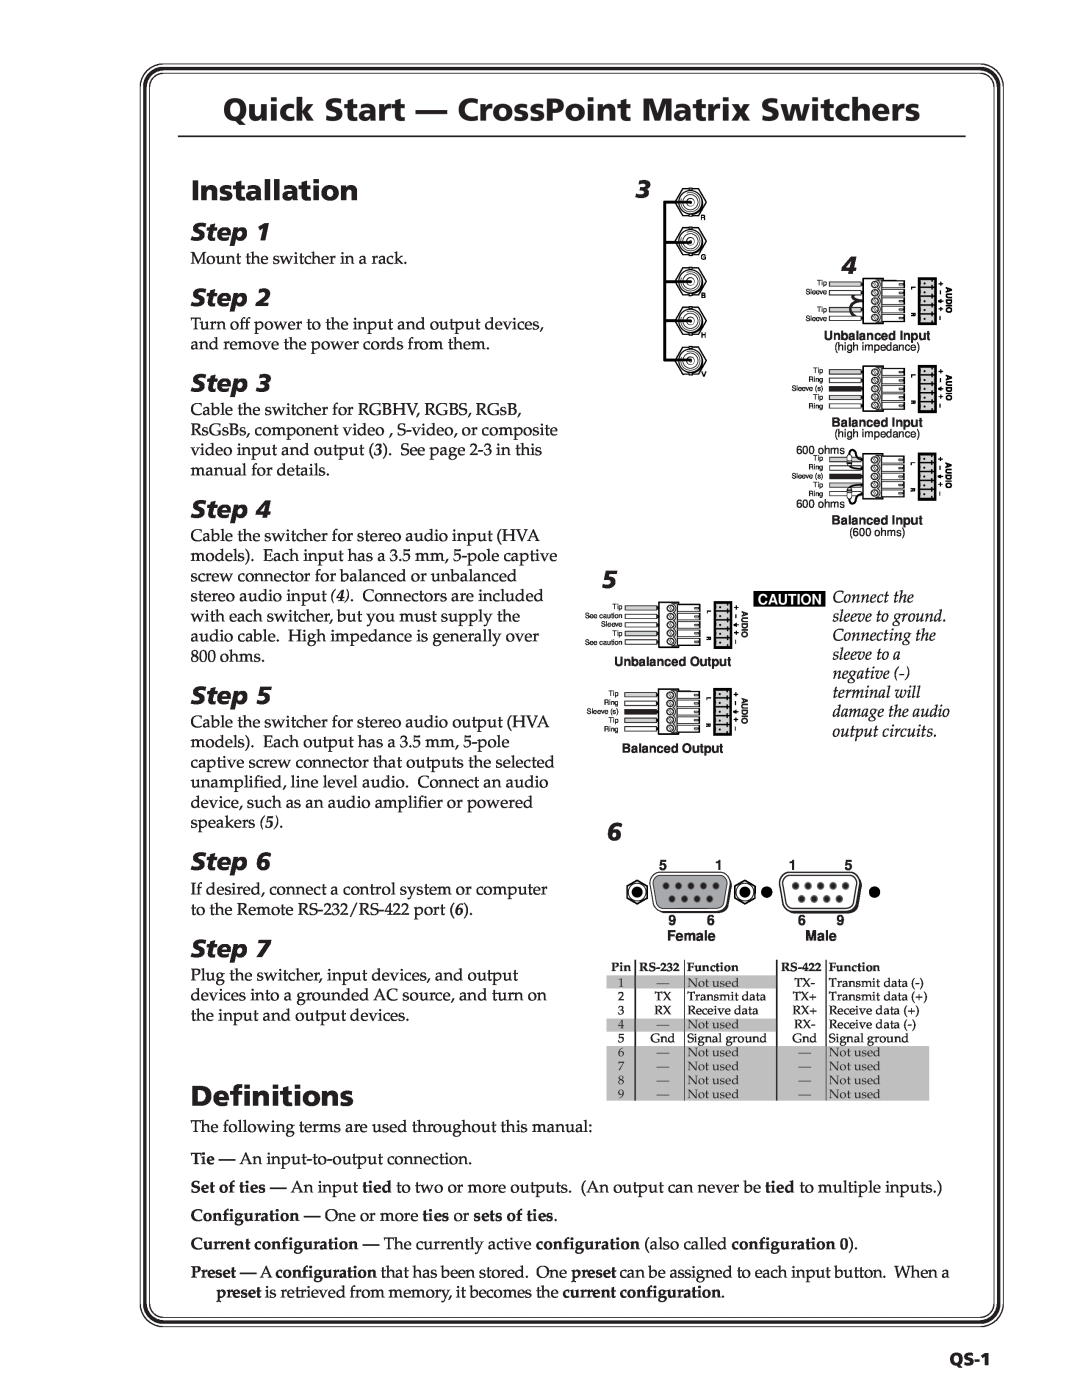 Extron electronic CrossPoint 128 manual Quick Start - CrossPoint Matrix Switchers, Installation, Definitions, Step, QS-1 